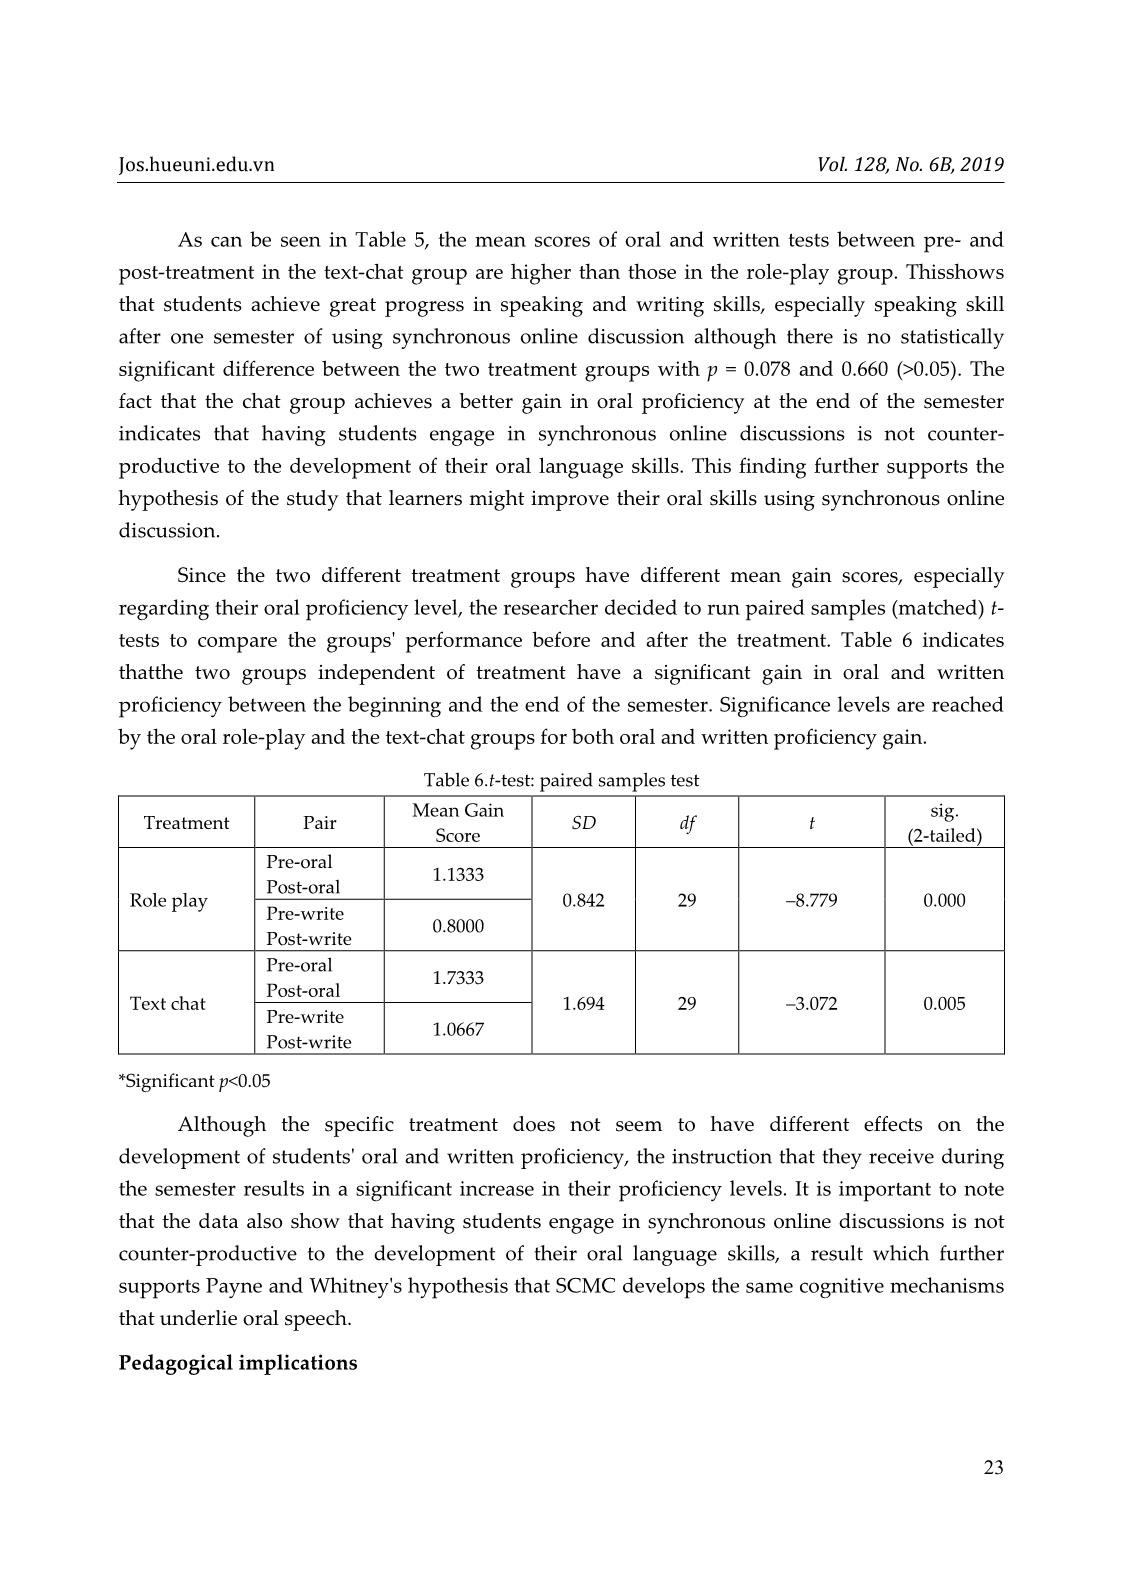 Quantitative analysis of the effect of synchronous online discussions on oral and written language development for efl university students in Vietnam trang 8